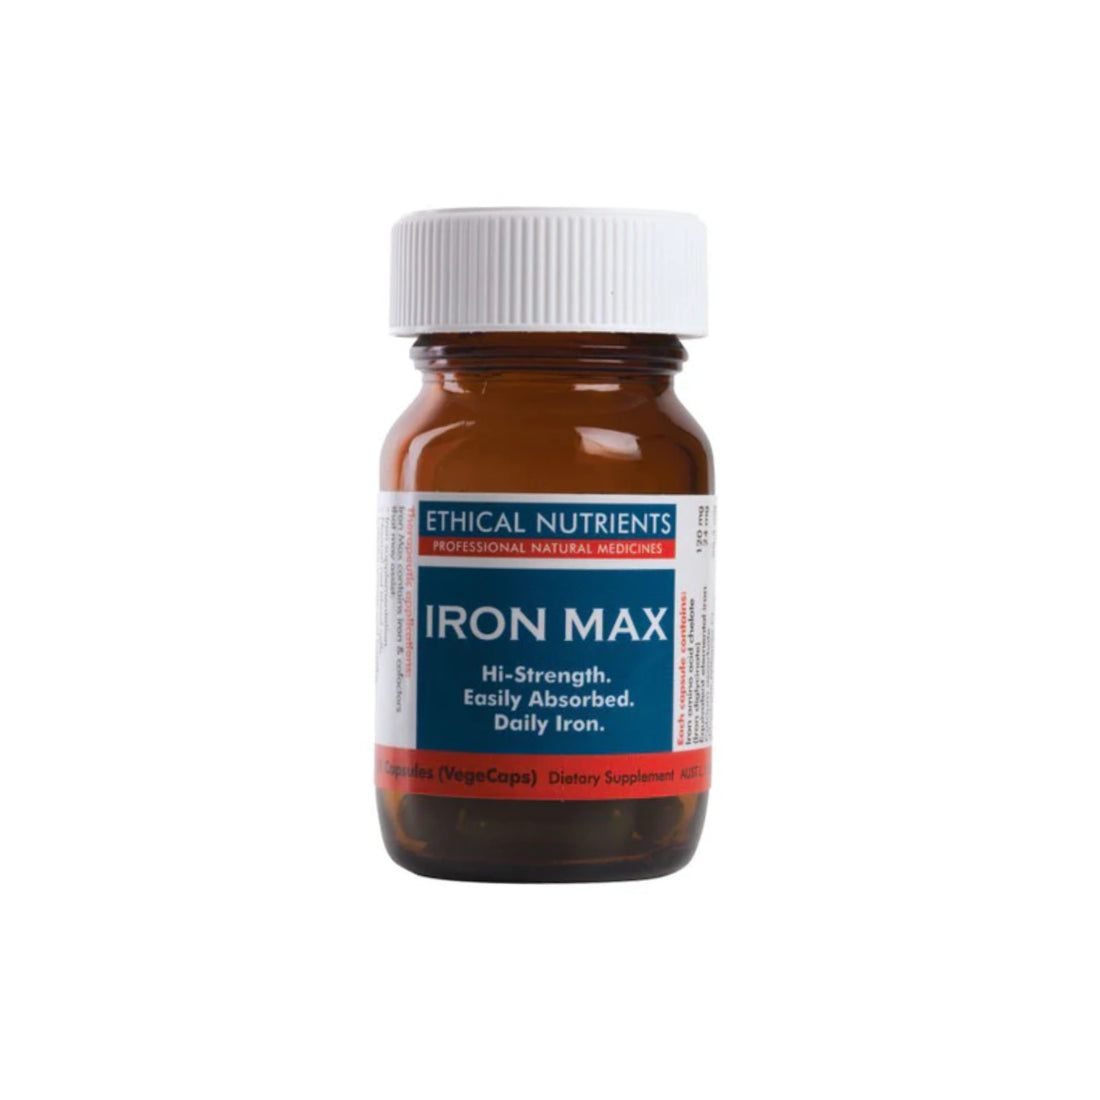 Ethical Nutrients Iron Max Vitamins and Health